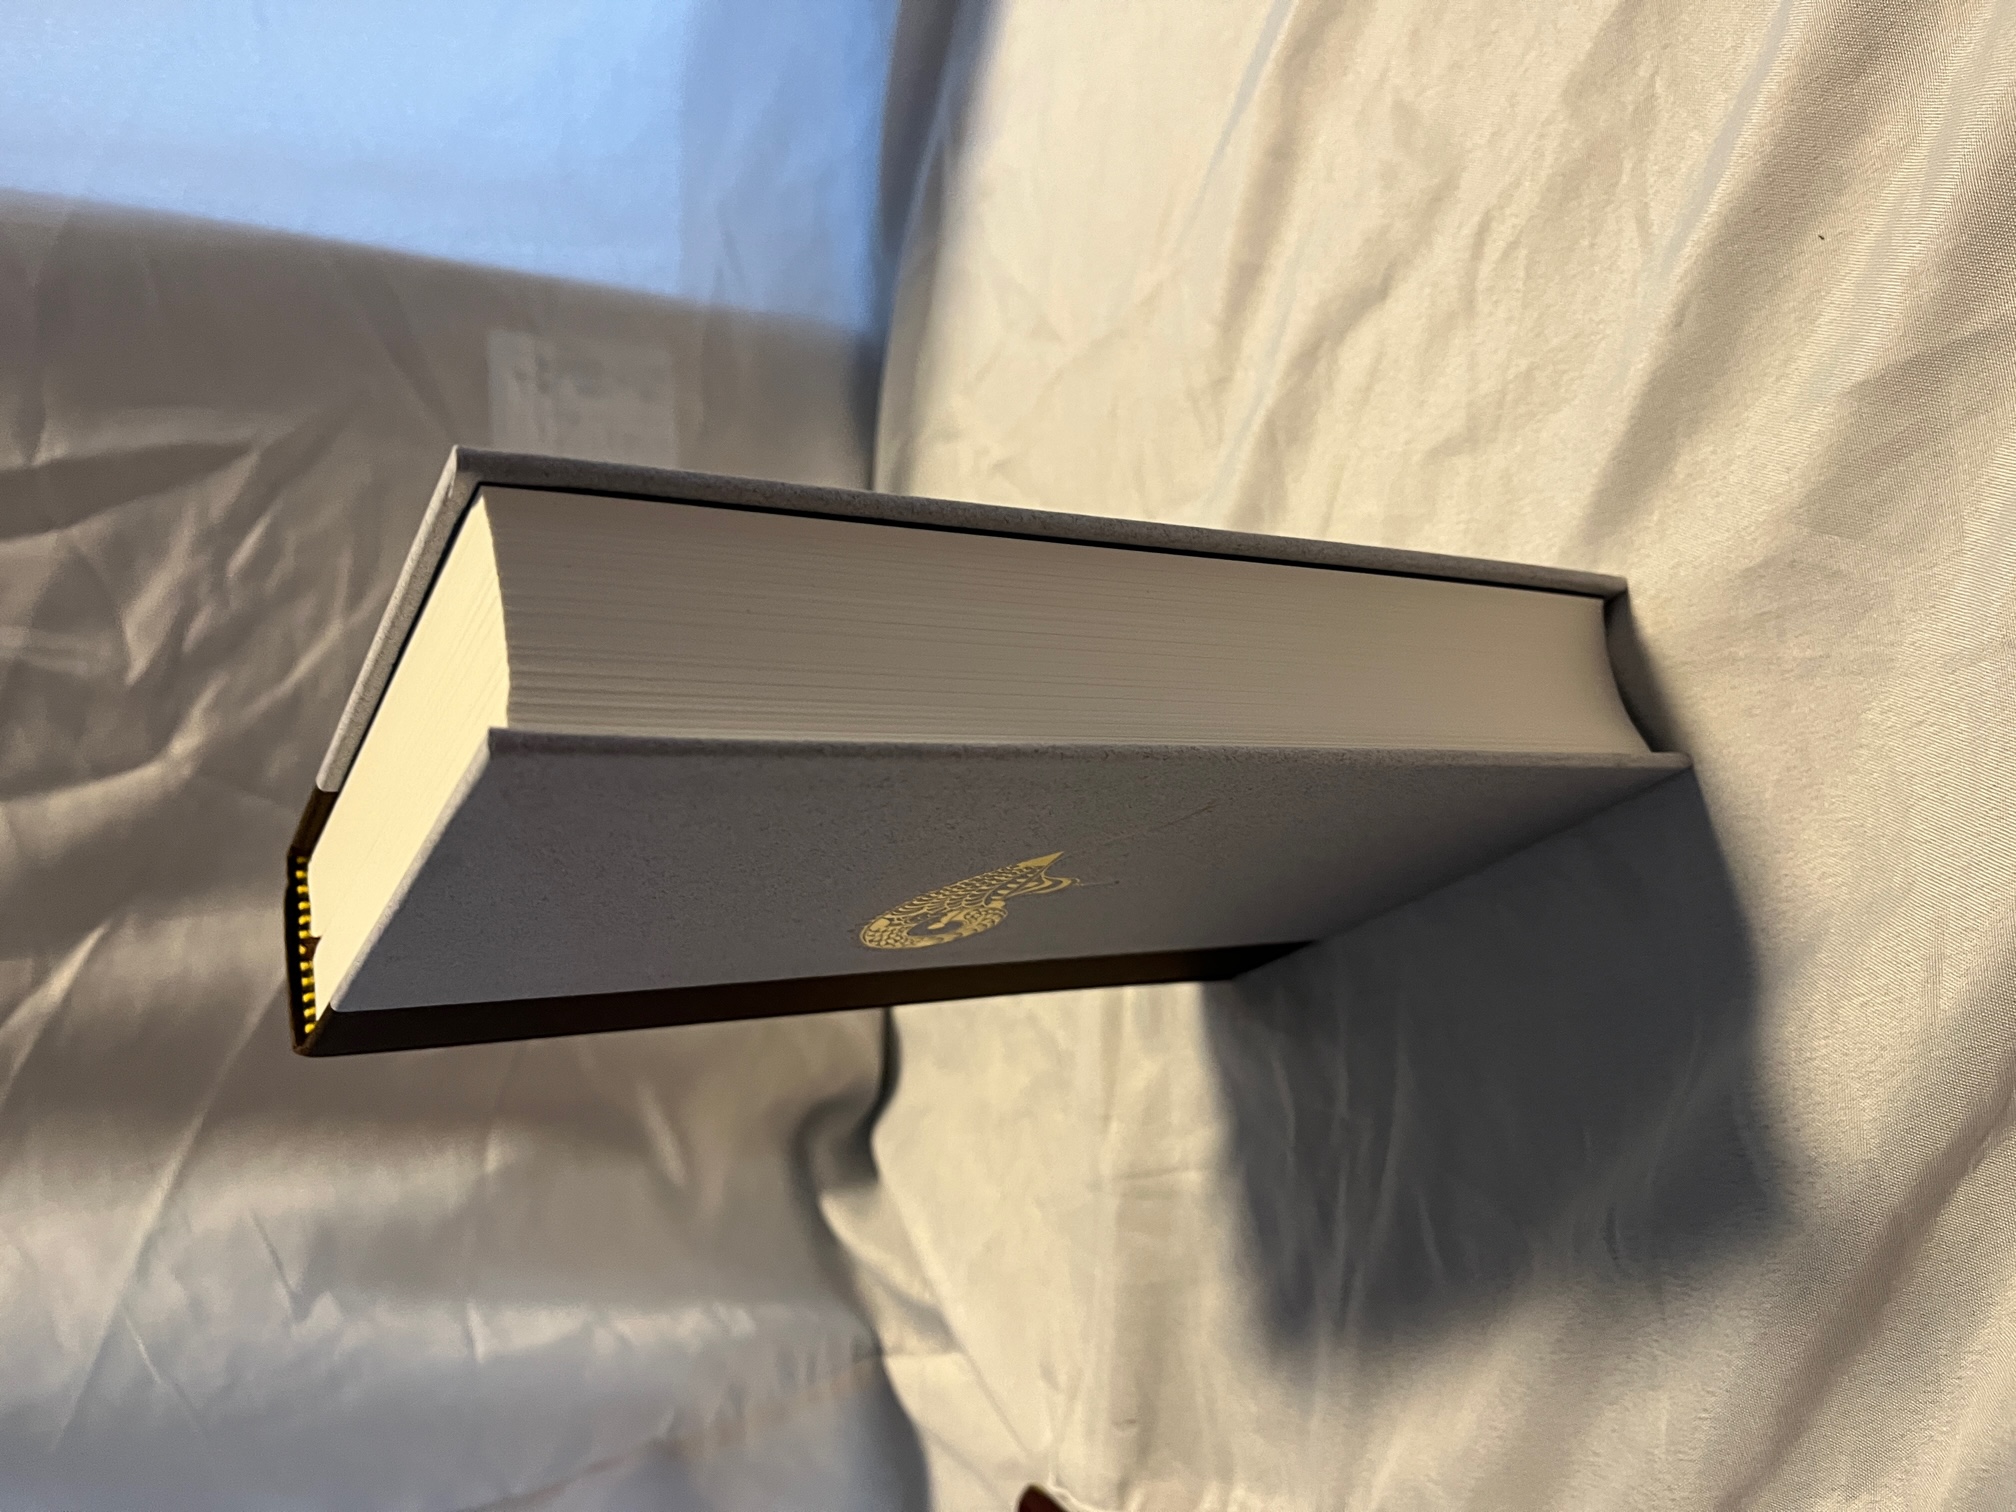 Unfinished Tales by J.R.R. Tolkien, Deluxe Slipcase Edition, UK 1st Printing 3